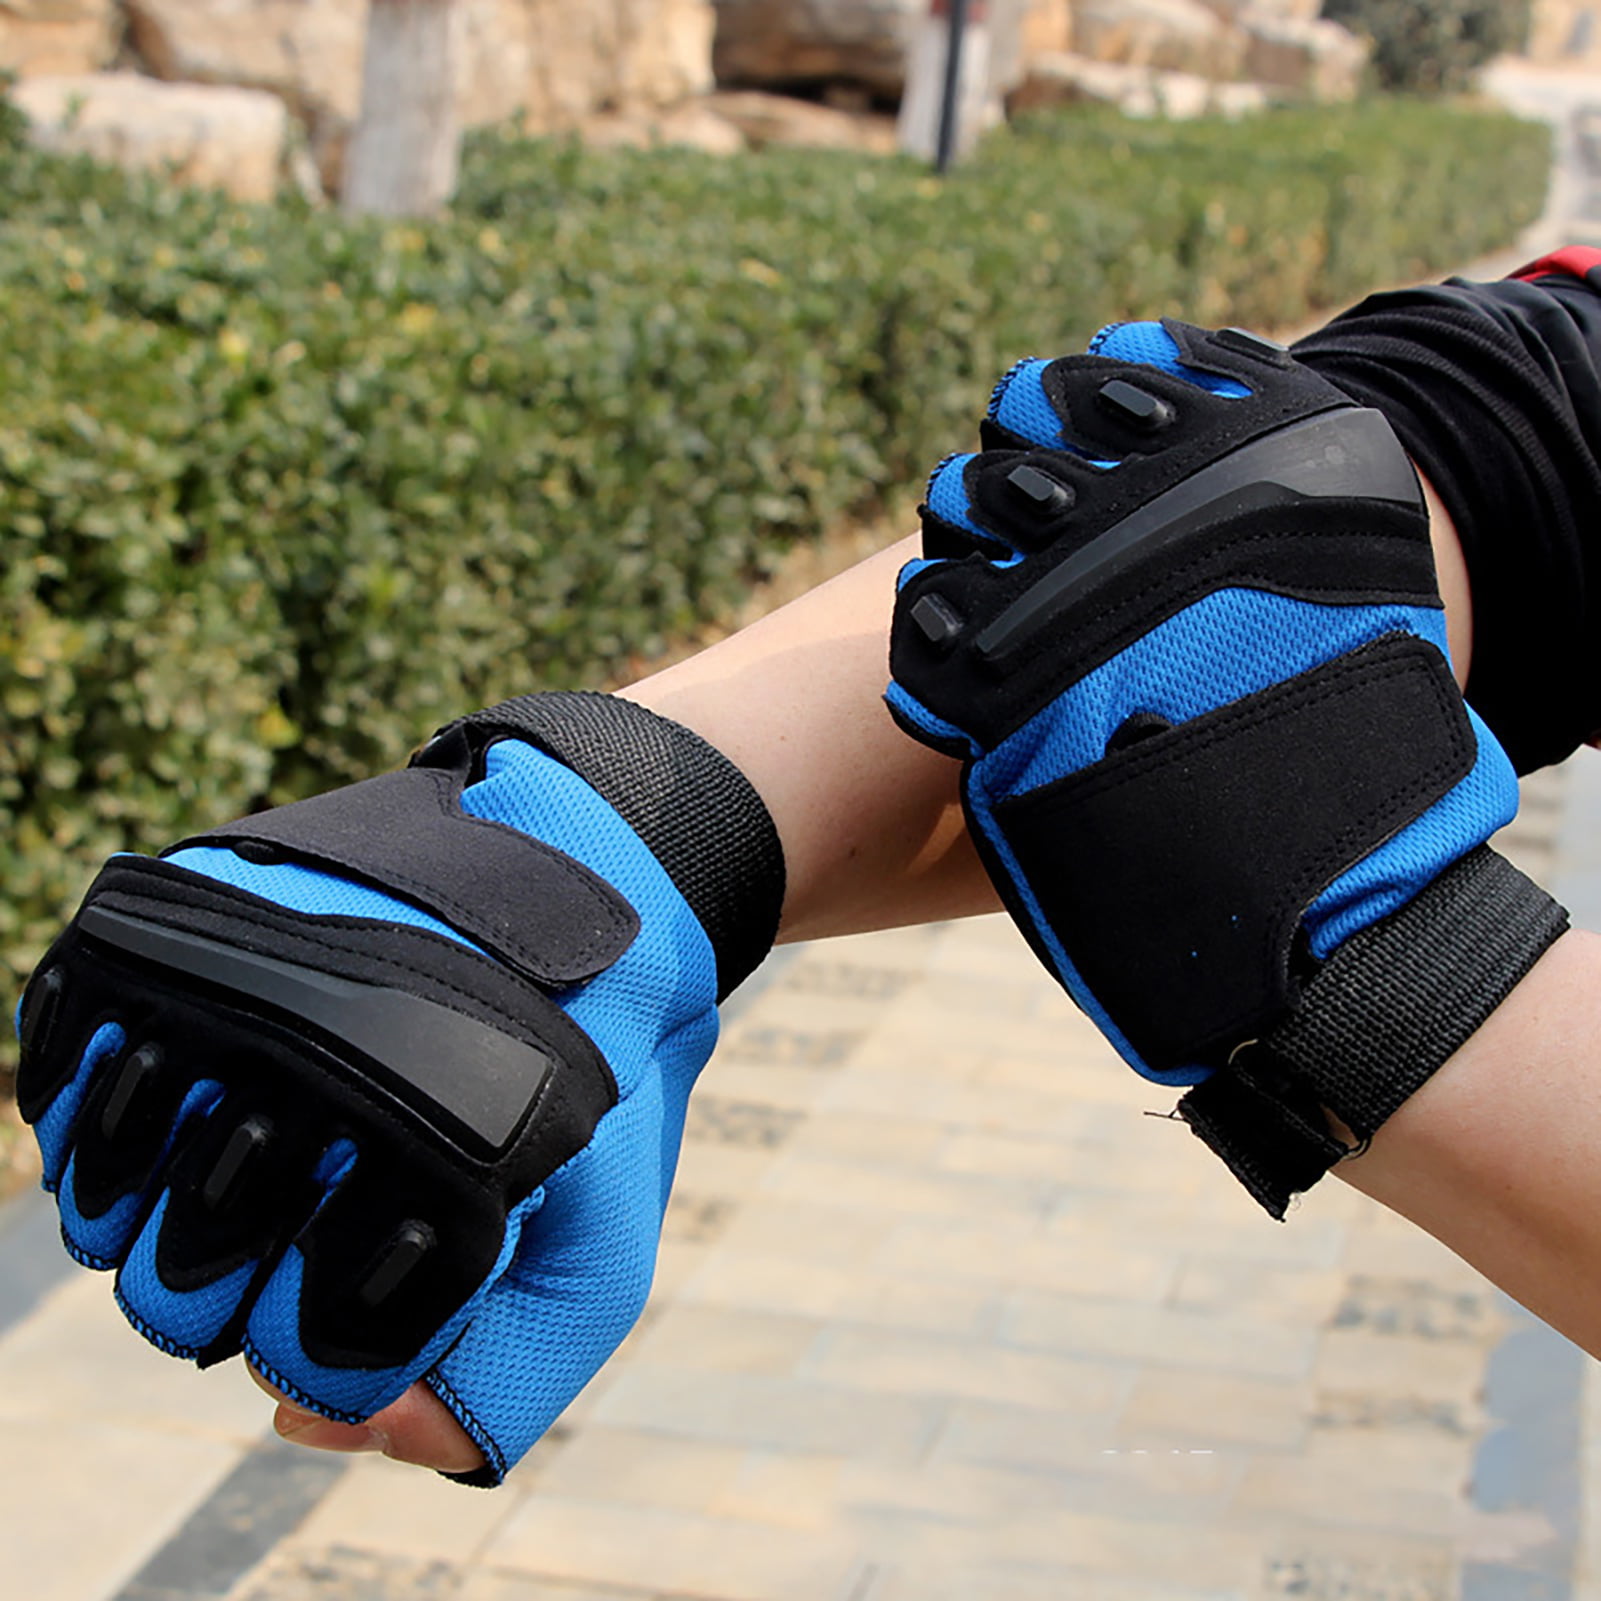 Details about   Light Blue XL Cross Training Gloves Wrist Support for Gym Workouts Weightlifting 